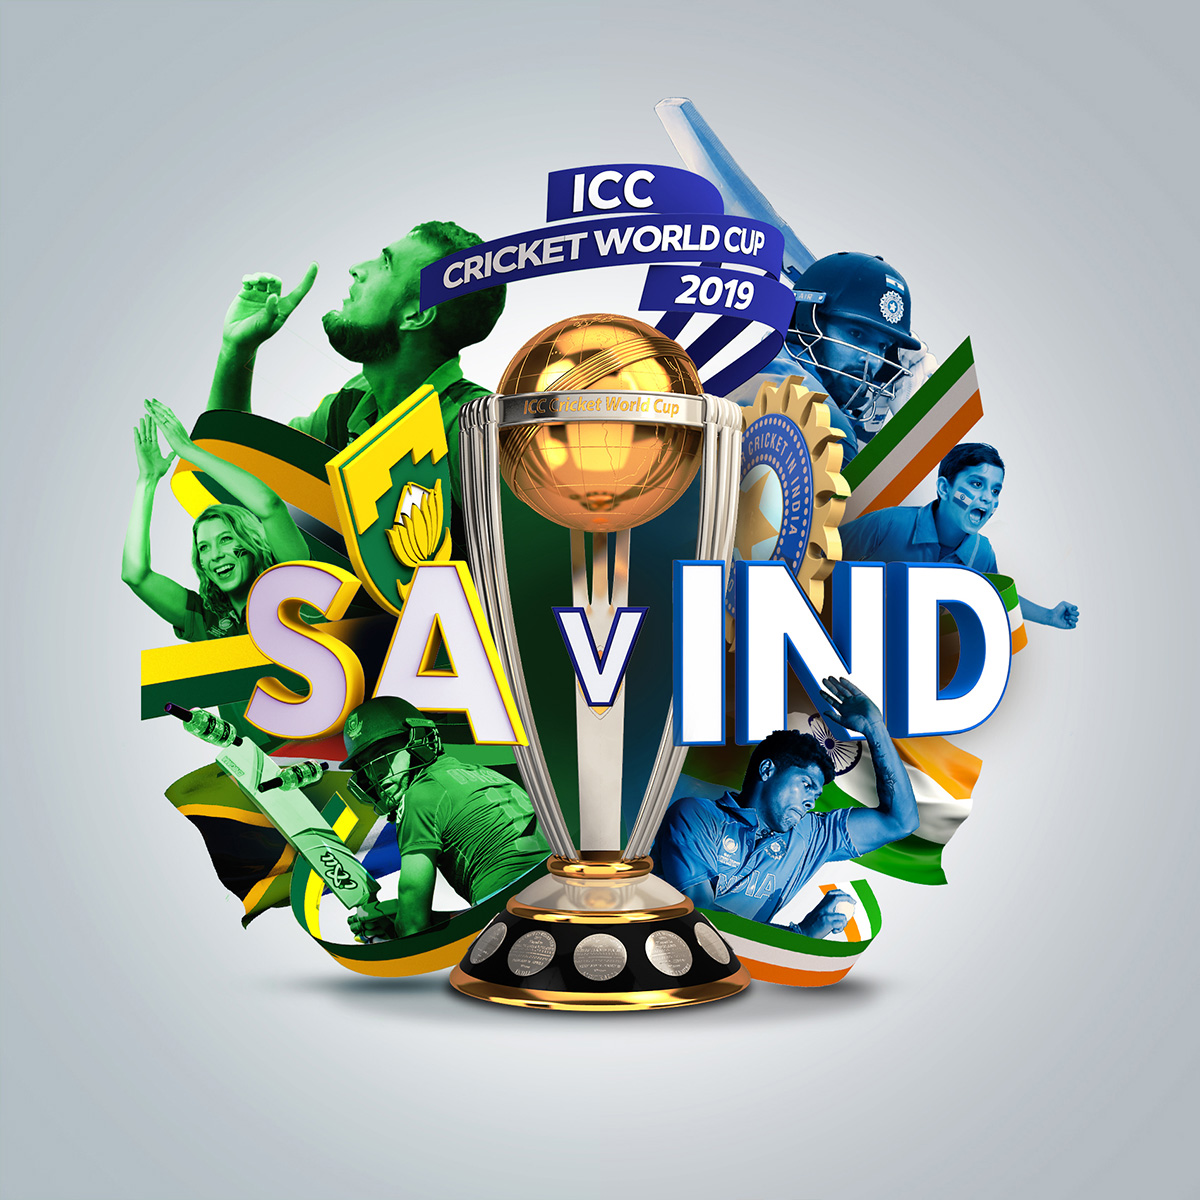 jhw_CWC19_H2H_SA_v_IND_S201.jpg